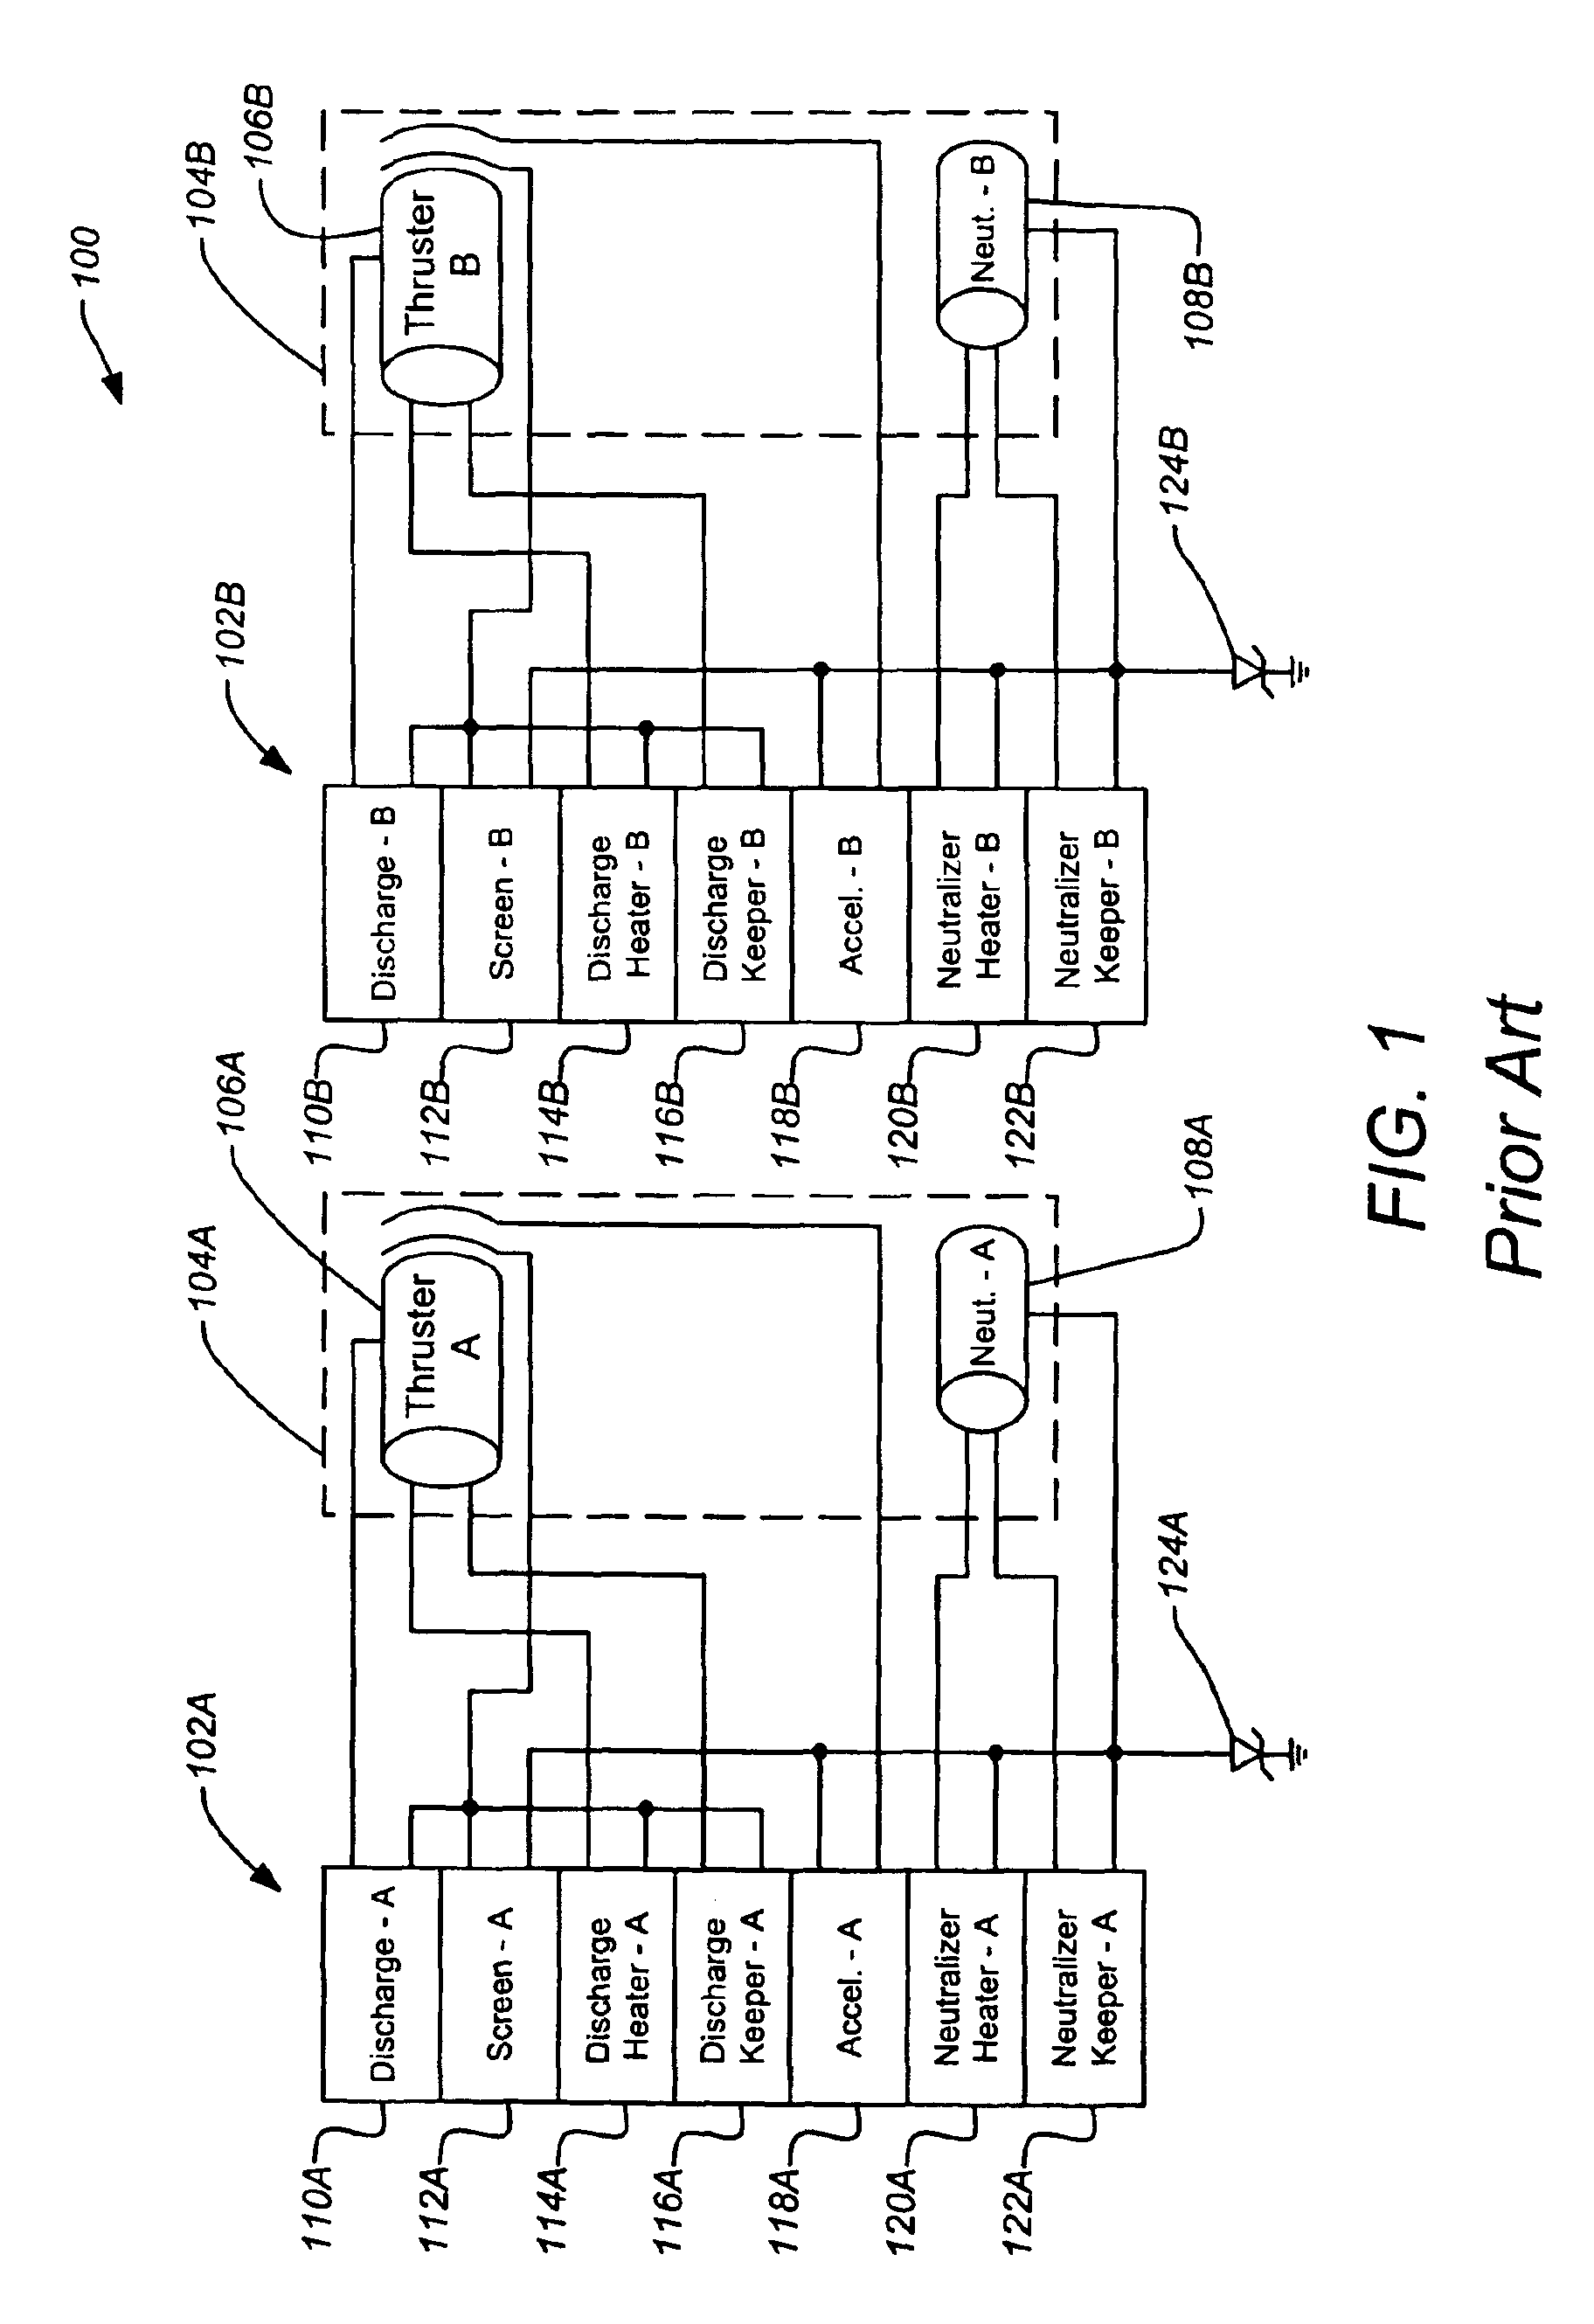 Method and apparatus for balancing the emission current of neutralizers in ion thruster arrays